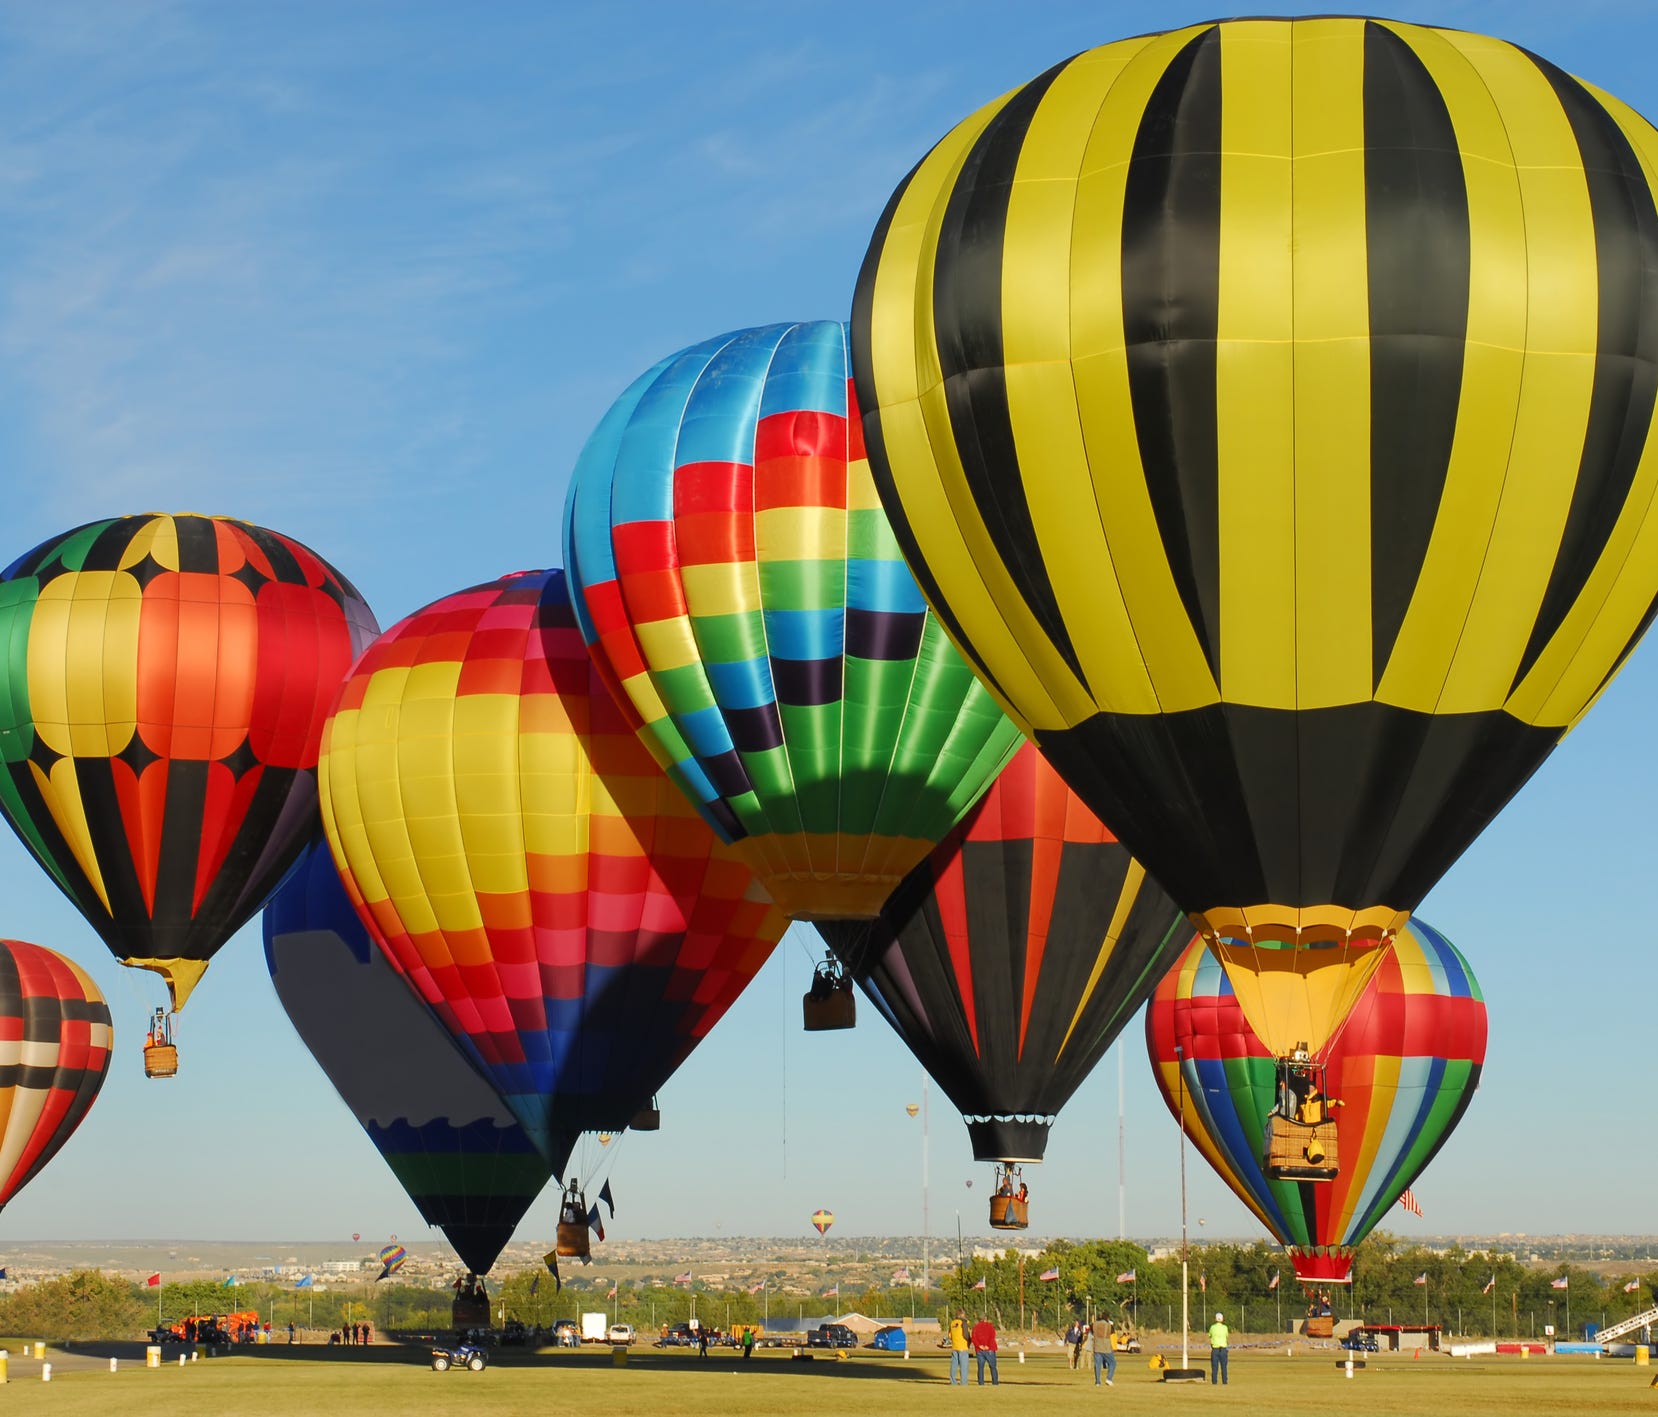 Albuquerque: New Mexico's largest city is experiencing a tourism boom. Budget travelers can head to this trending city this fall and enjoy warm weather and an action-packed weekend. The Albuquerque International Balloon Fiesta makes the city one of t